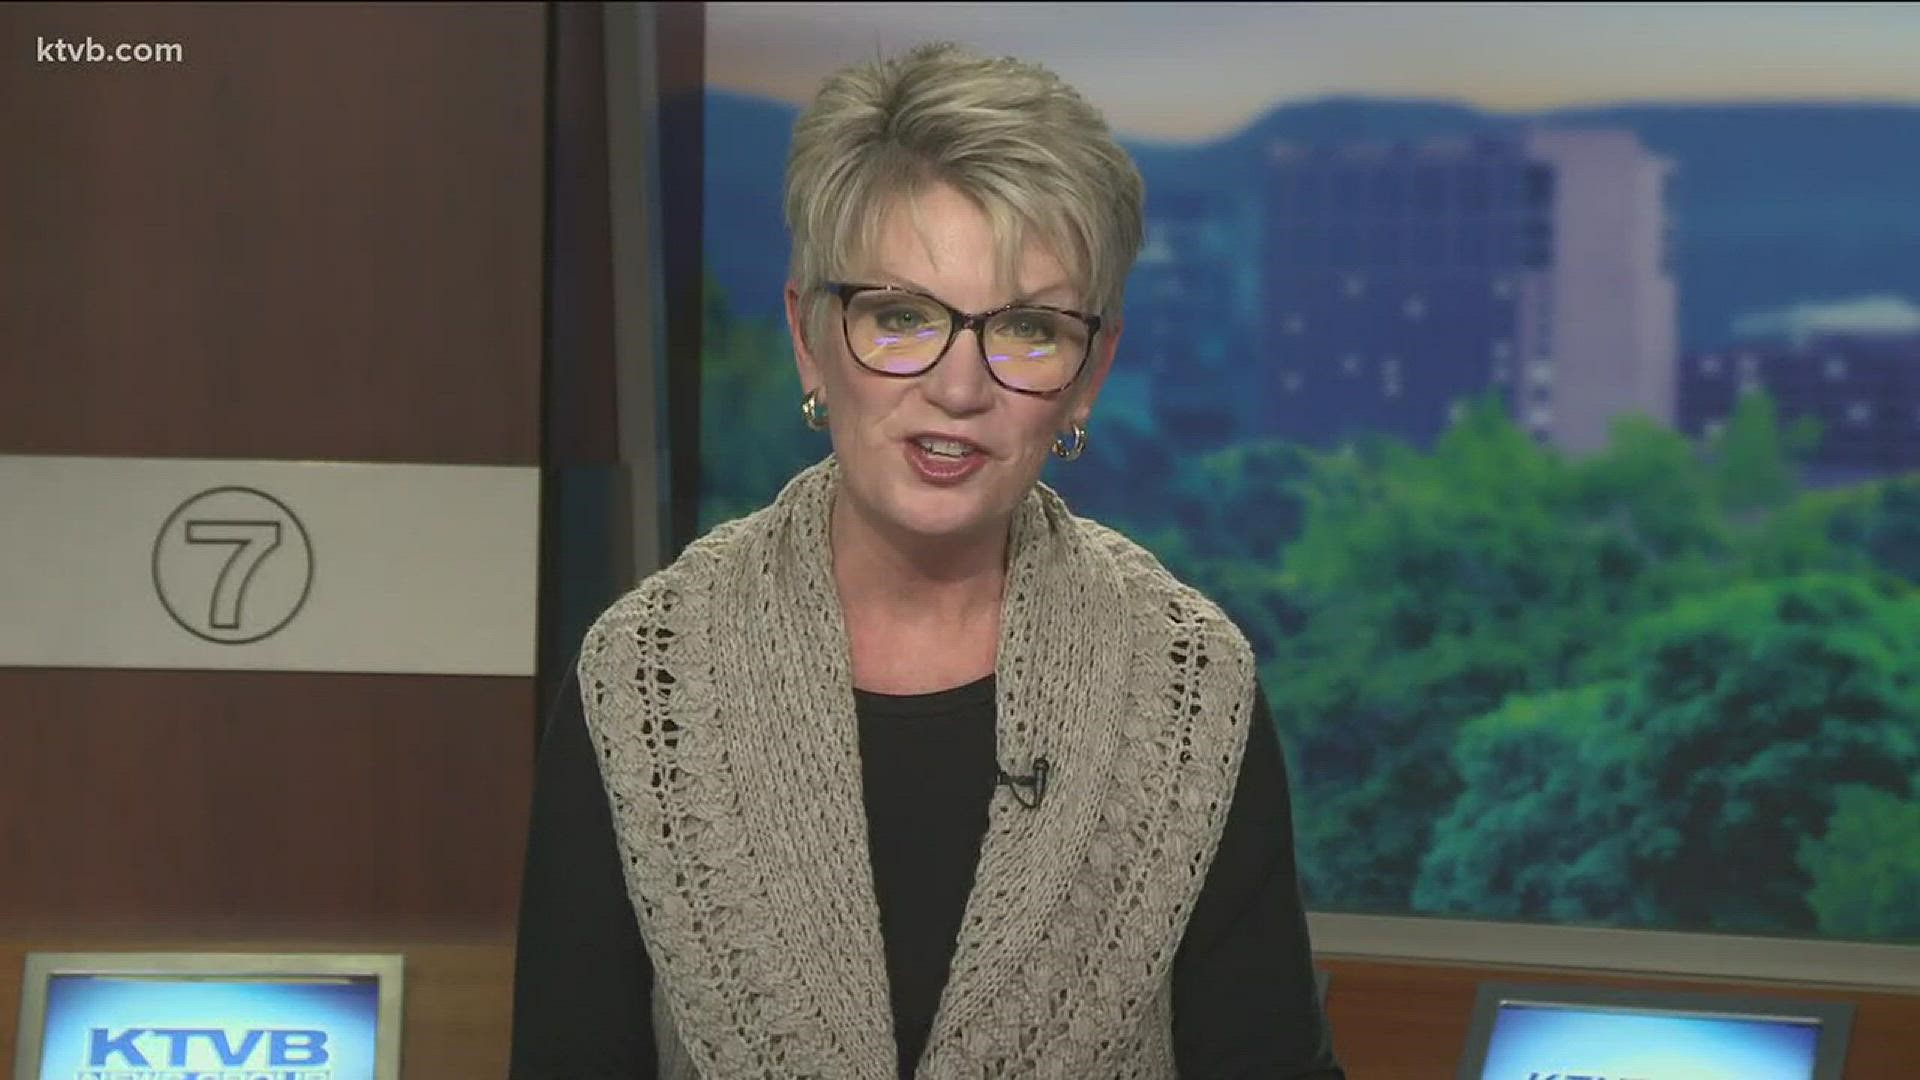 KTVB News Director Kate Morris has been promoted to president and general manager of the station. Morris' selection for the top position at KTVB was announced January 17. She takes over from current GM Doug Armstrong, who will retire March 9 after two dec